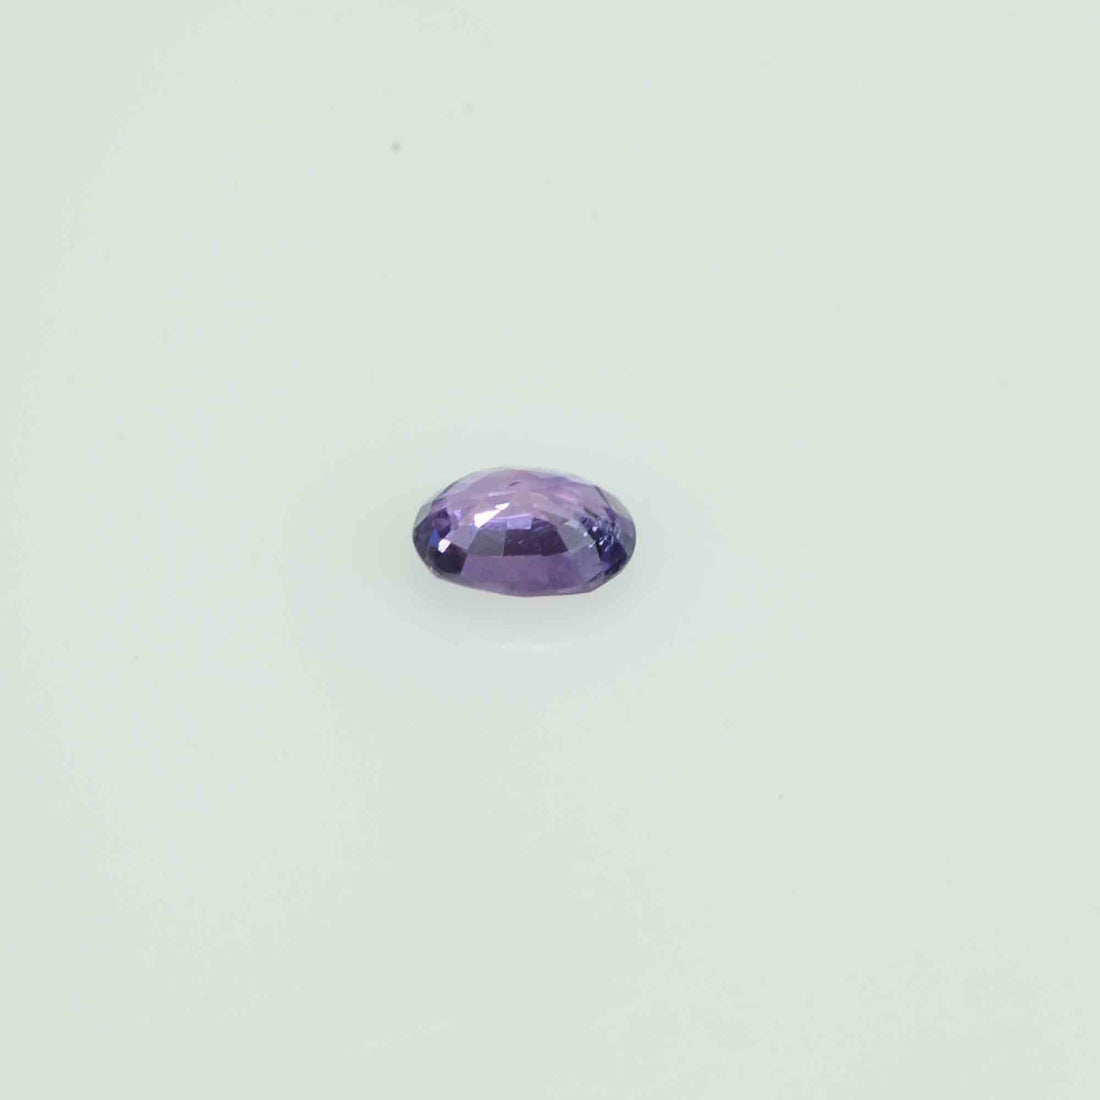 0.23 cts Natural Purple Sapphire Loose Gemstone Oval Cut